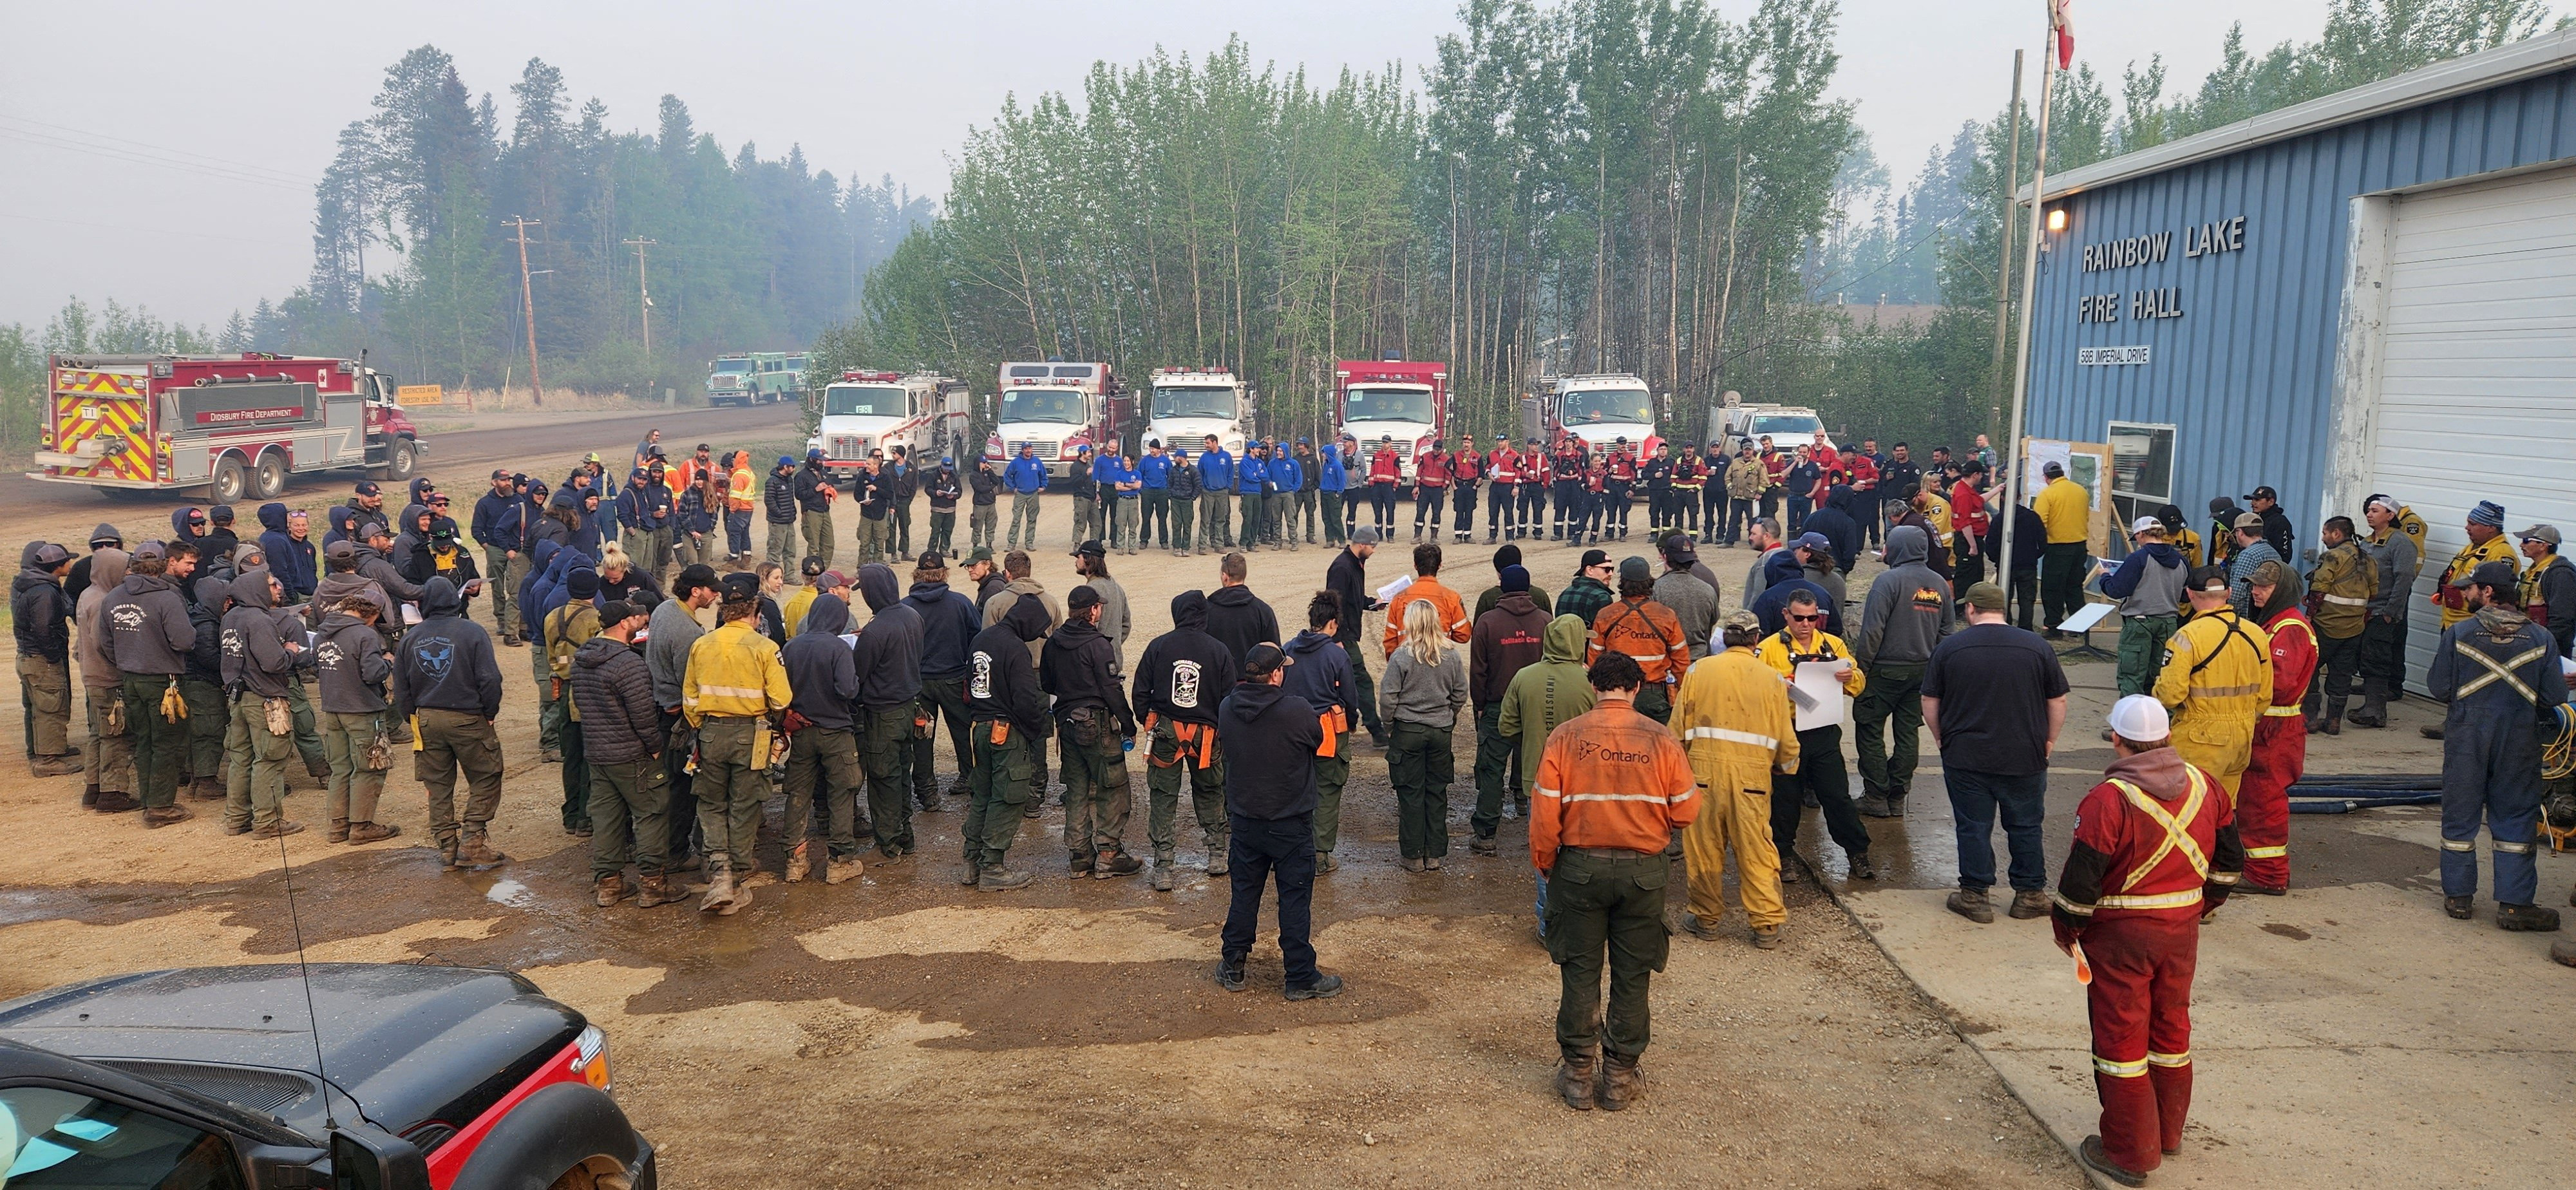 Firefighters gather for a morning briefing at Rainbow Lake Fire Hall